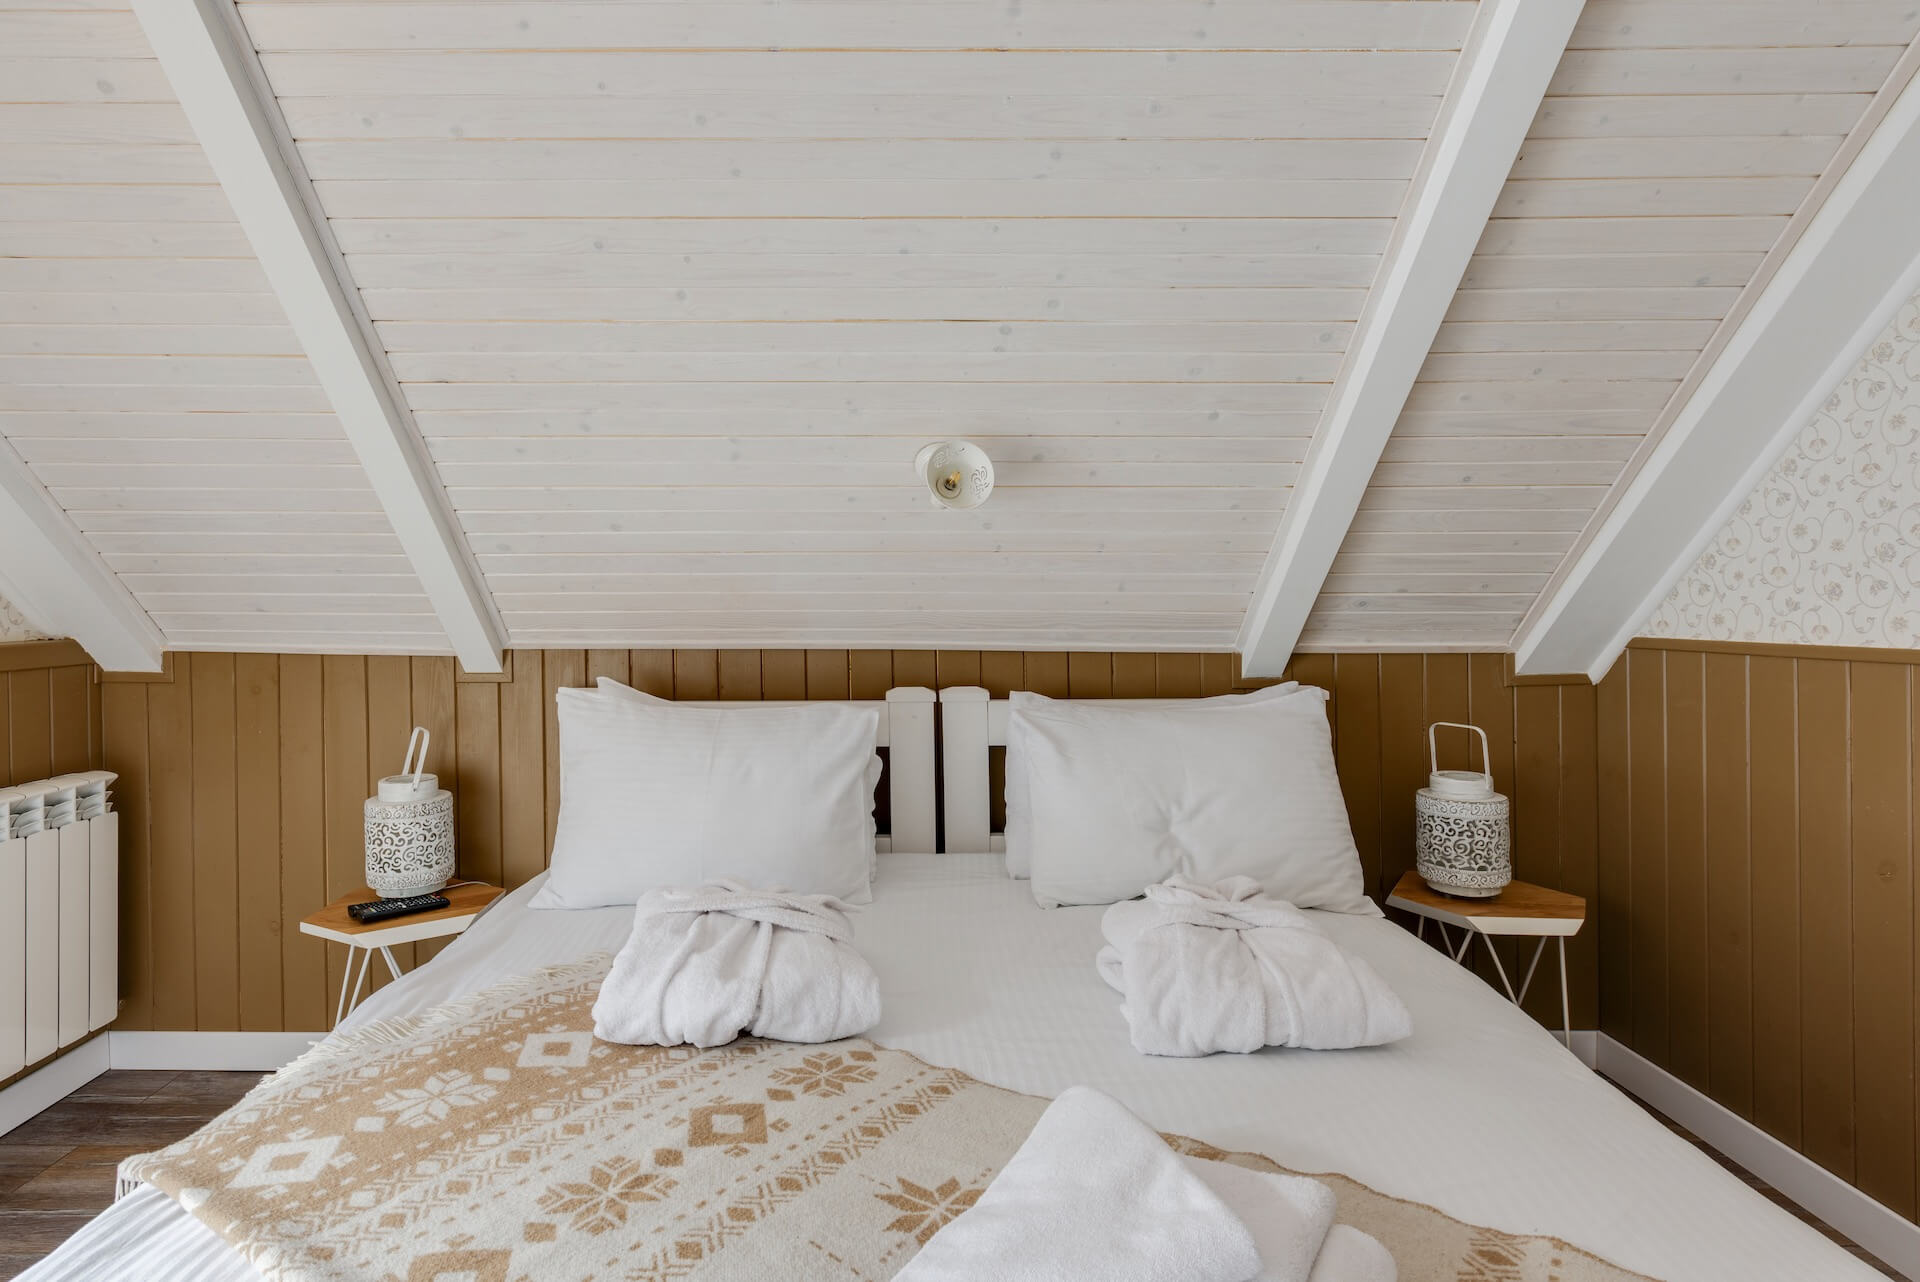 Wooden bed with white linen and pillows